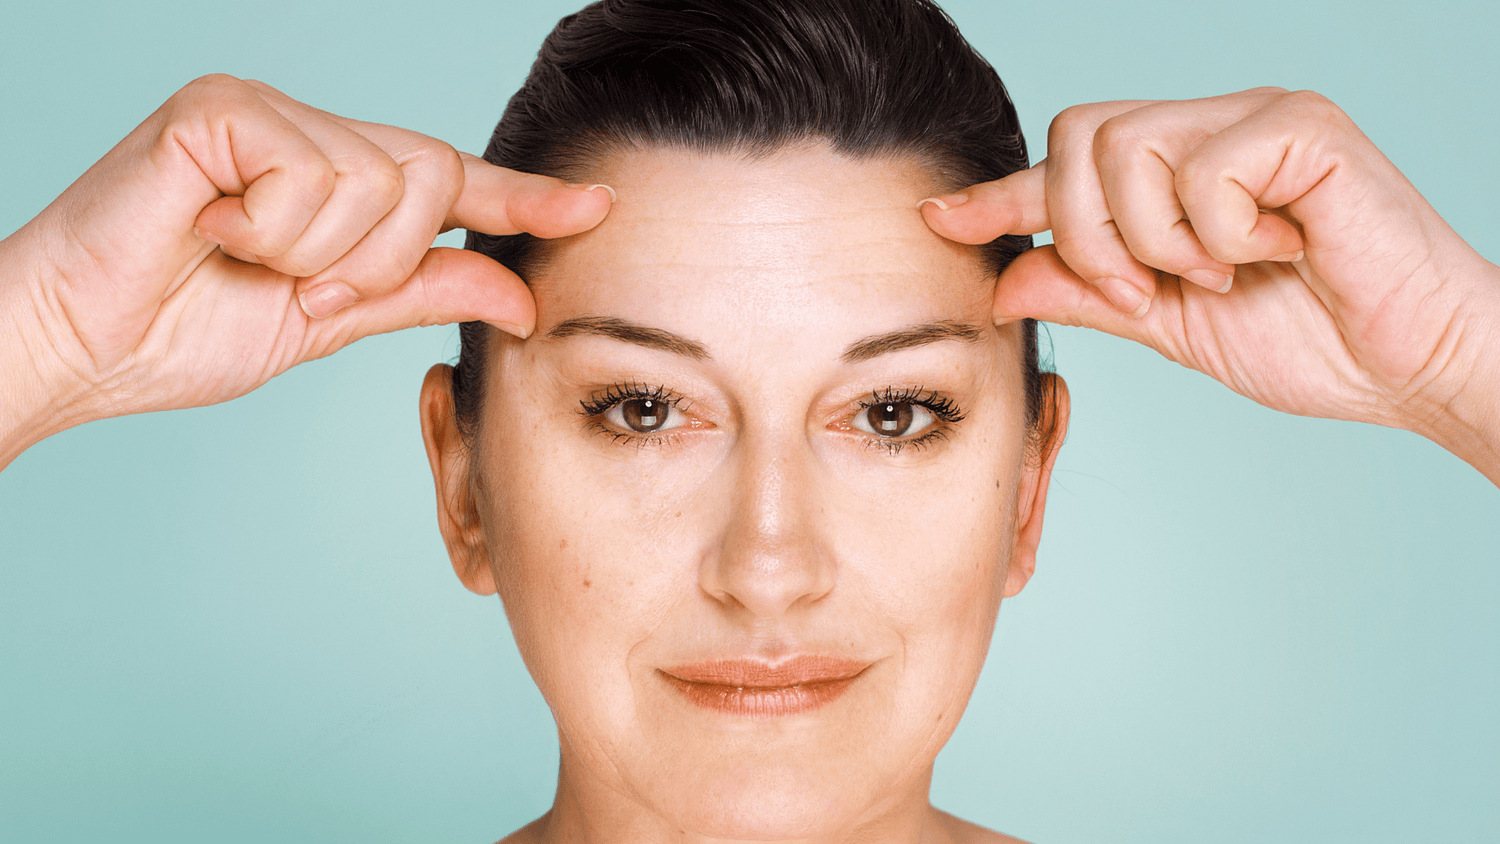 How to Prevent and Treat Wrinkles?